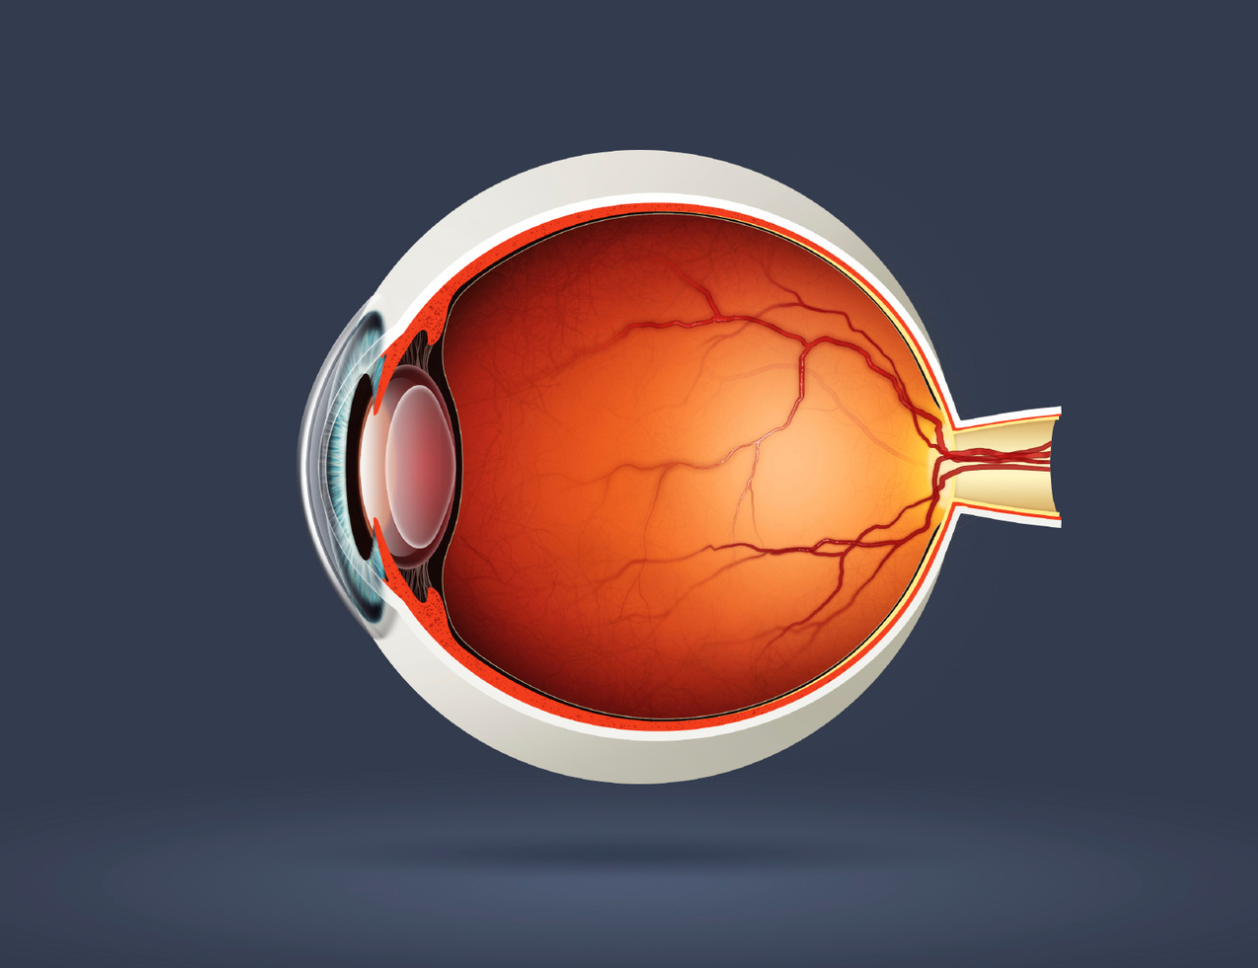 Data Show Vabysmo Effective, Safe in Treatment of Wet Age-Related Macular Degeneration 